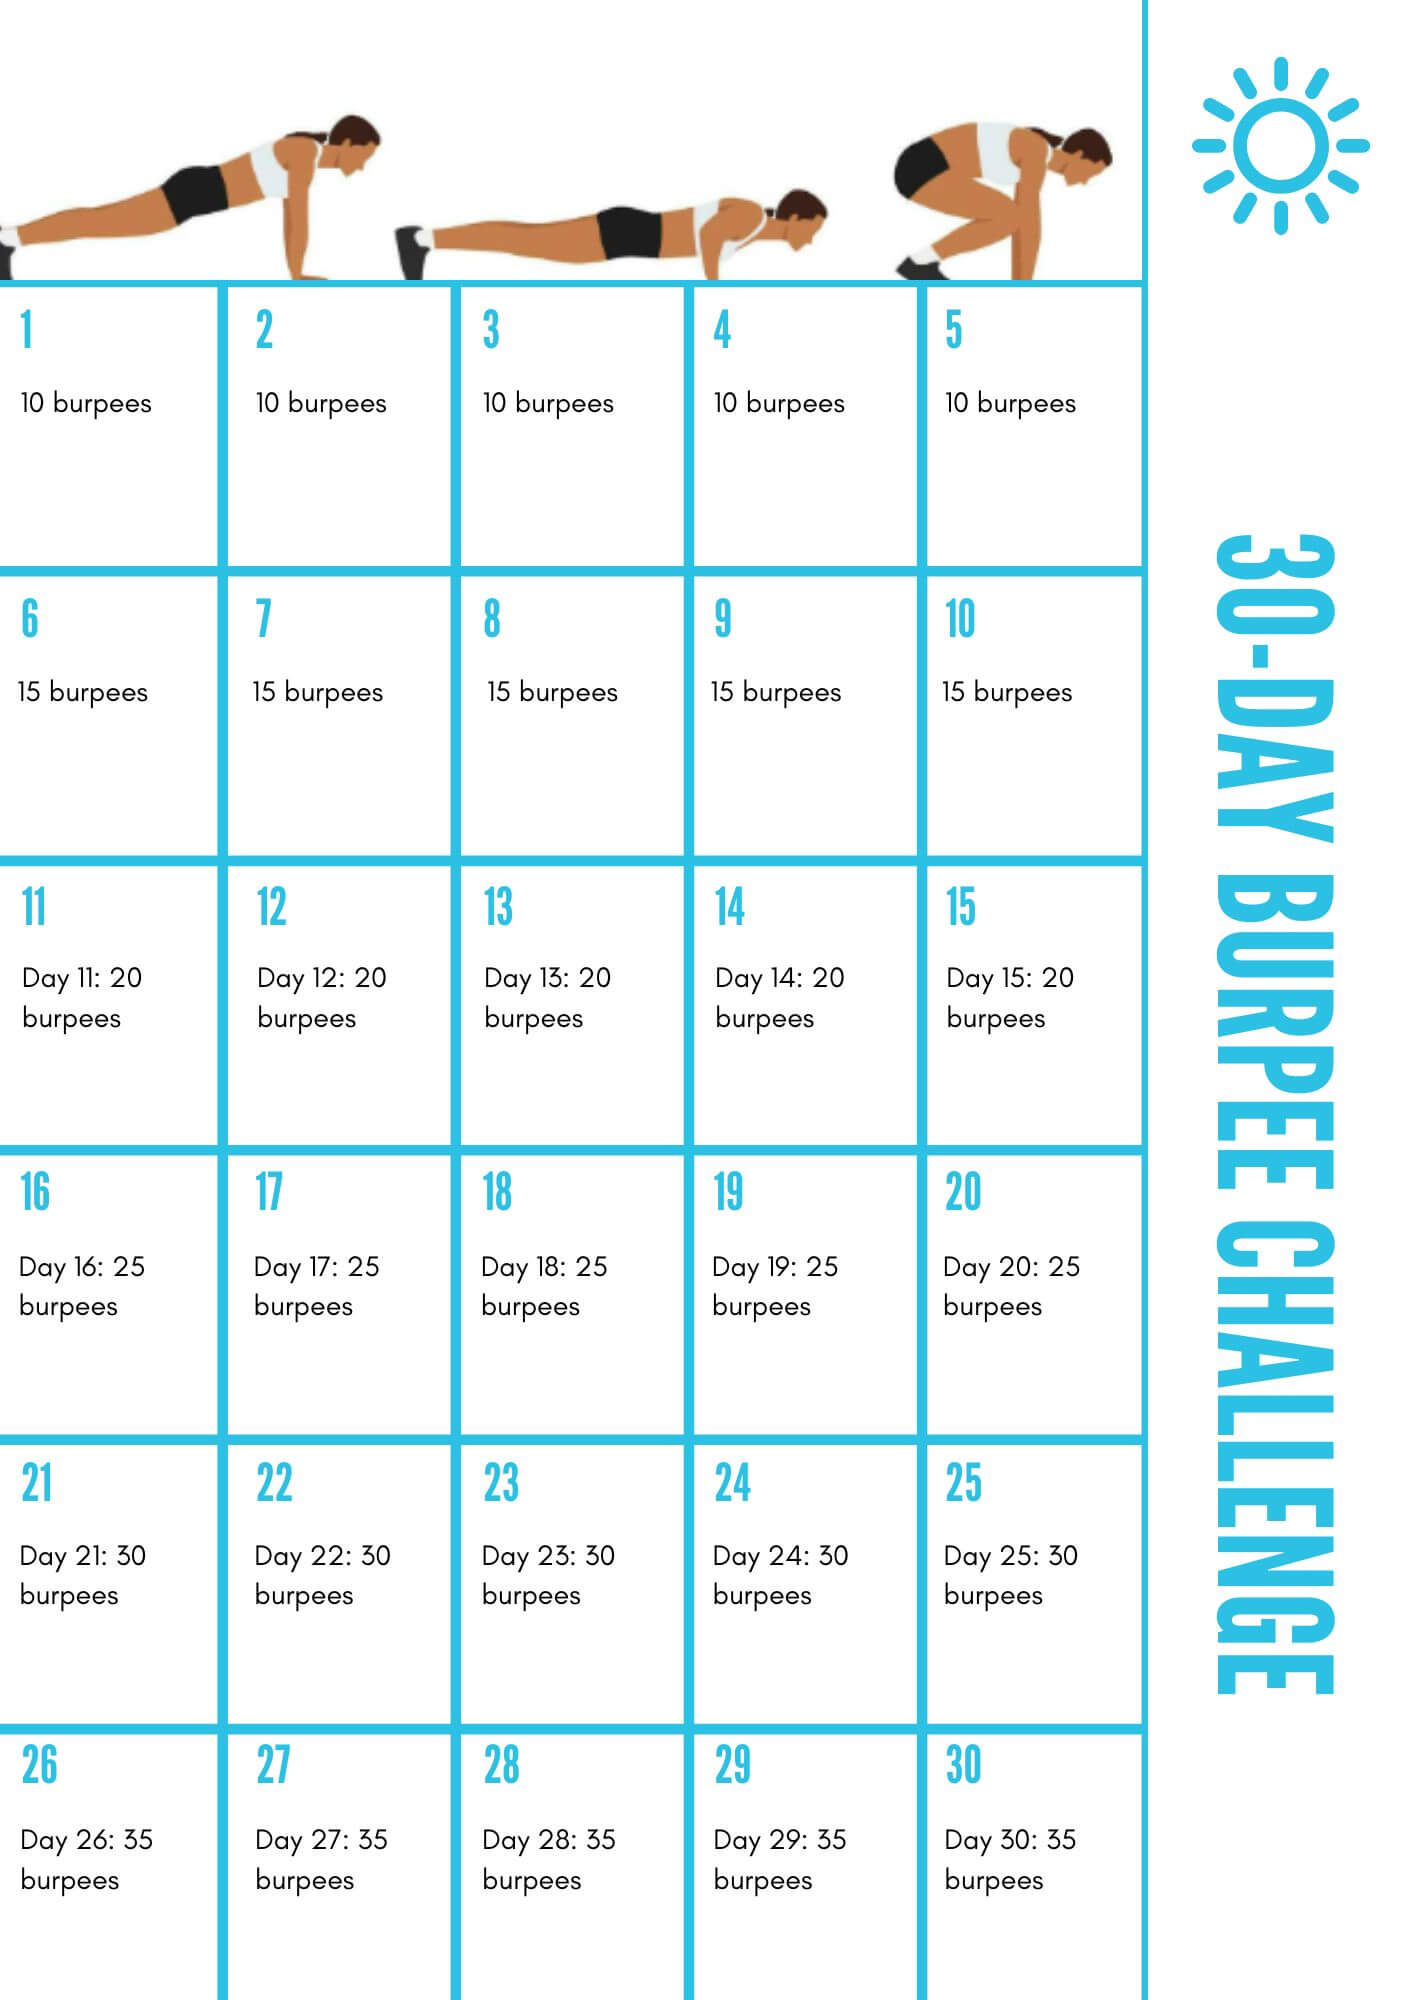 Infographic showing all the details from days 1 to 30 and reps for burpees challenge